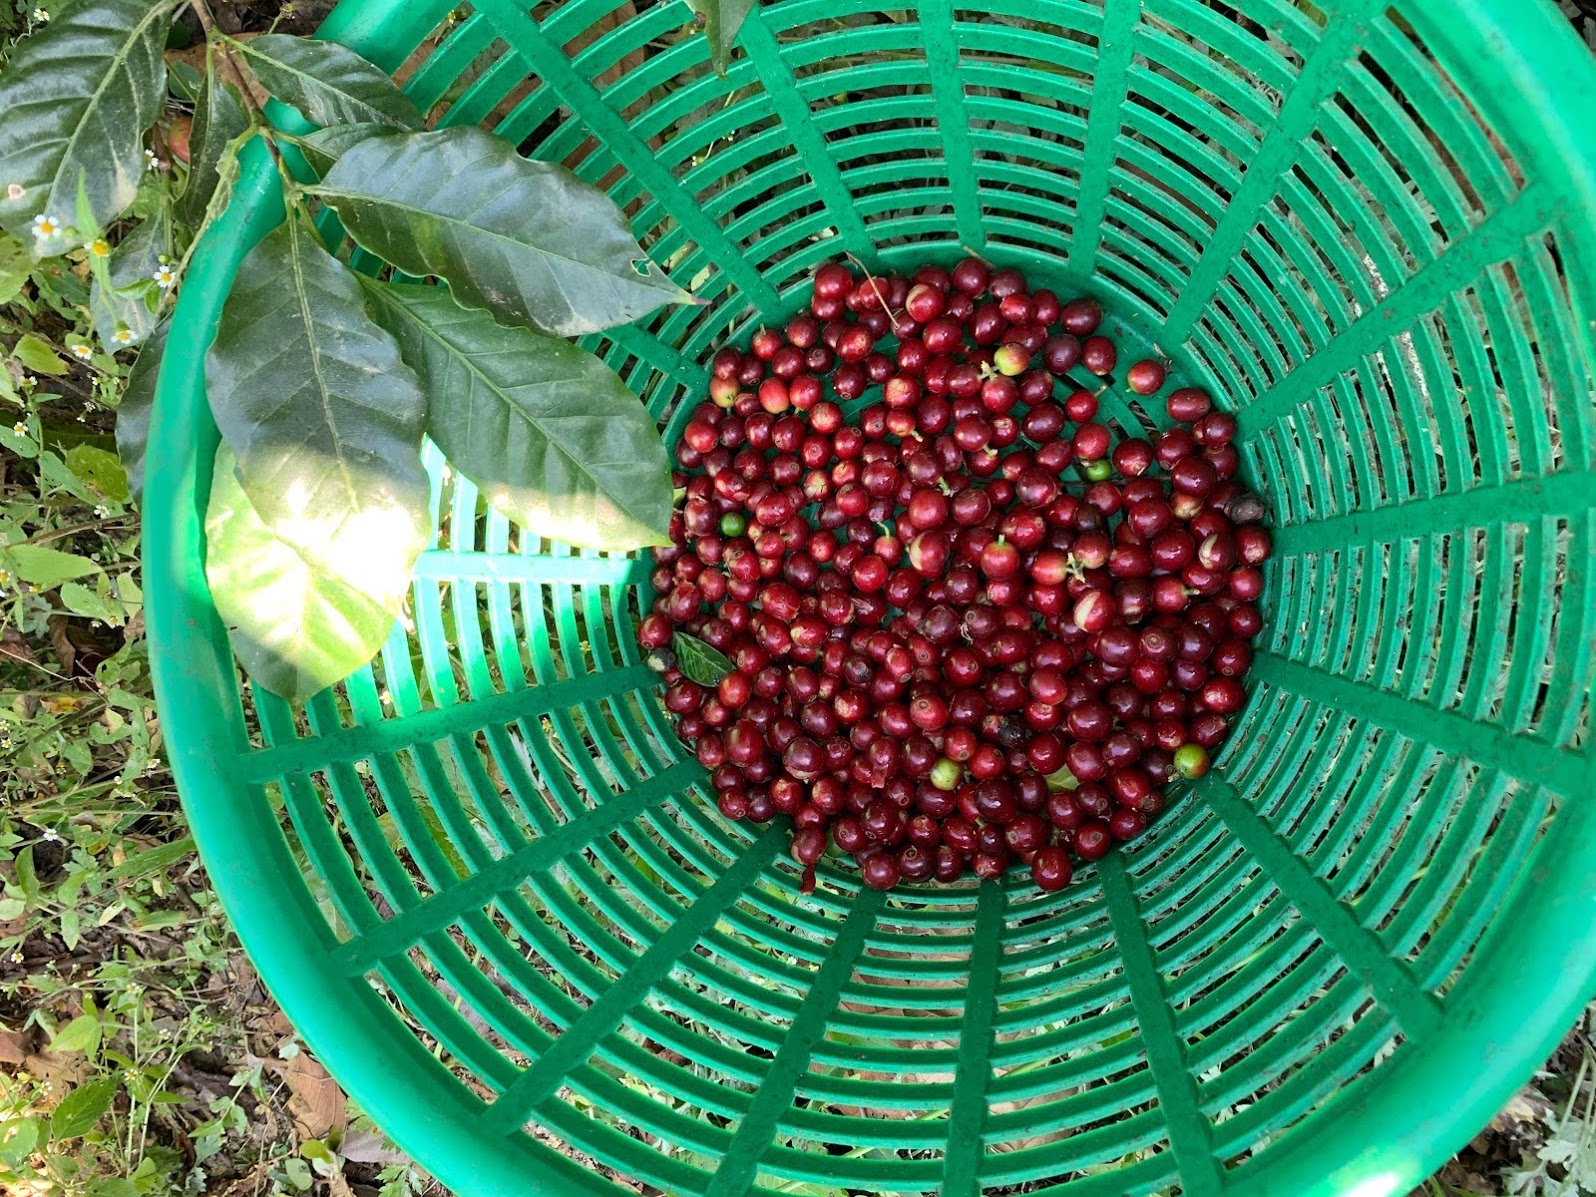 Experiencing each step of the process in growing good coffee | Vista Hermosa